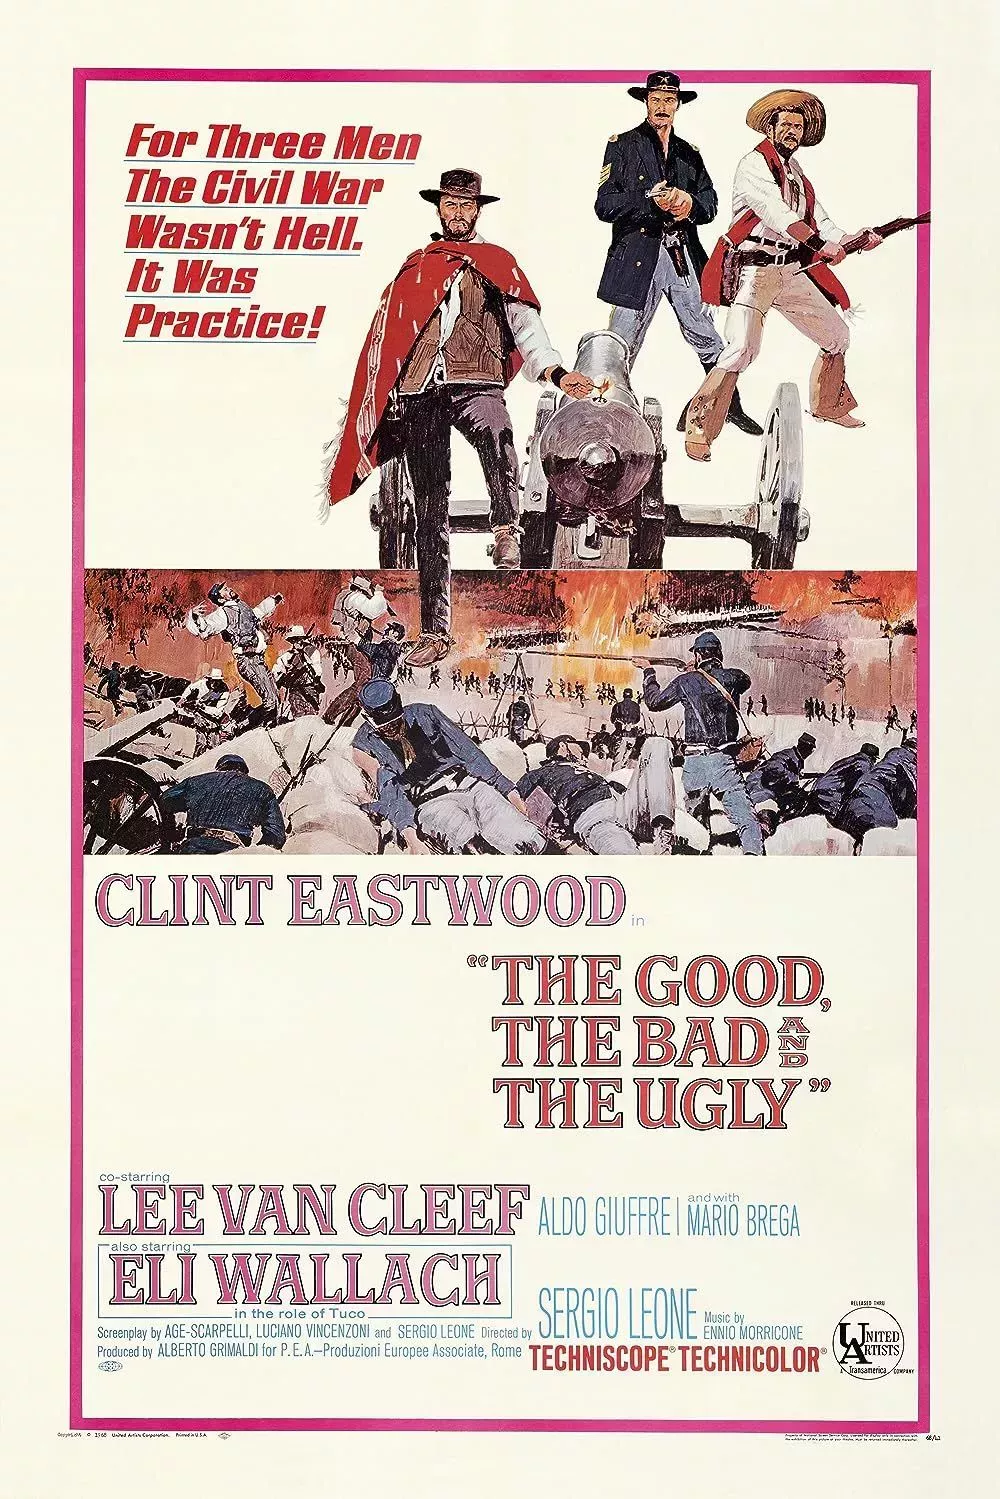 The original poster for The Good, the Bad and the Ugly (1966)